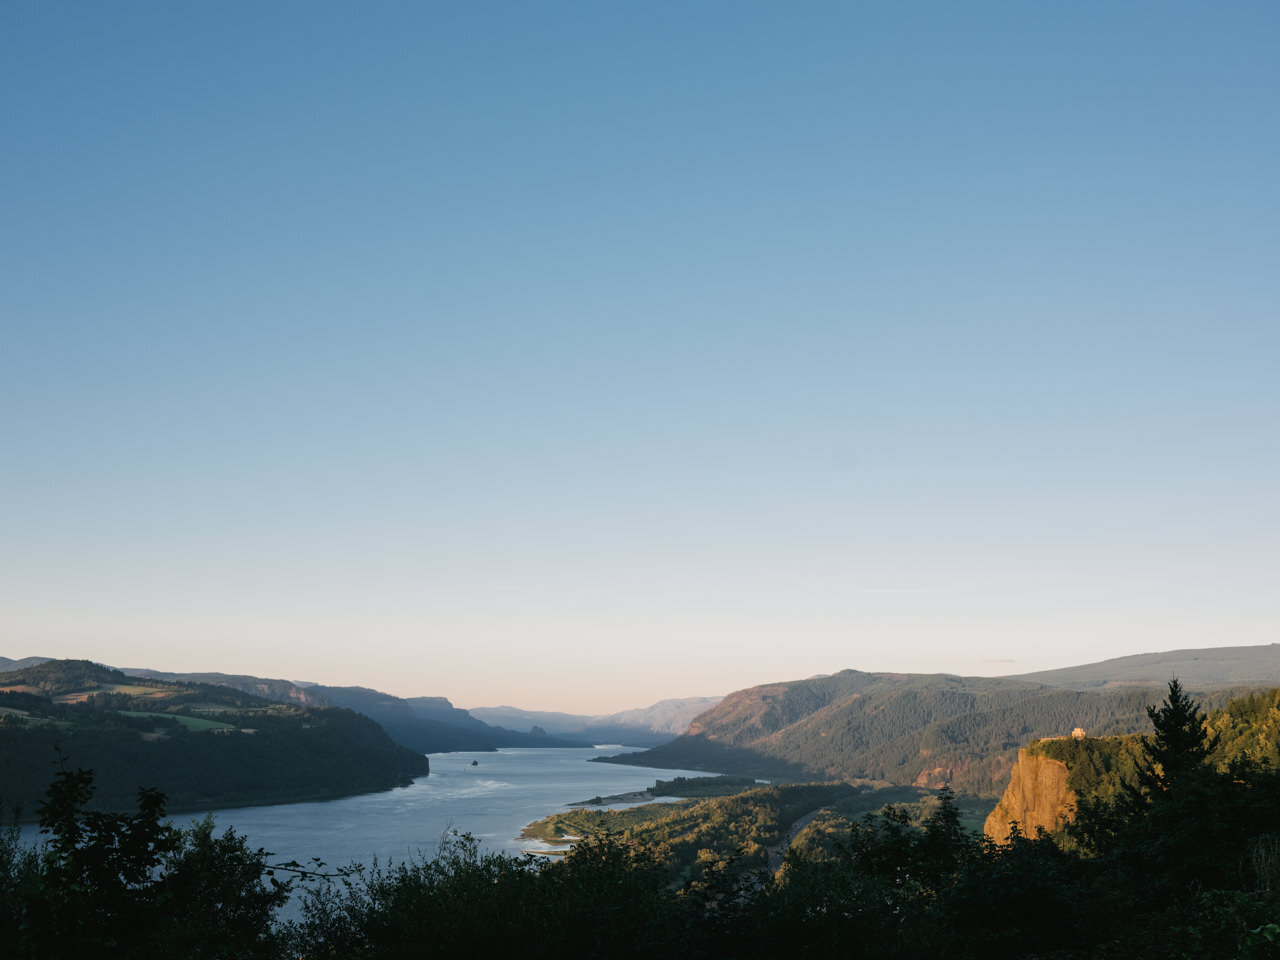  Sunset photo of menucha retreat center viewpoint of Columbia gorge river 